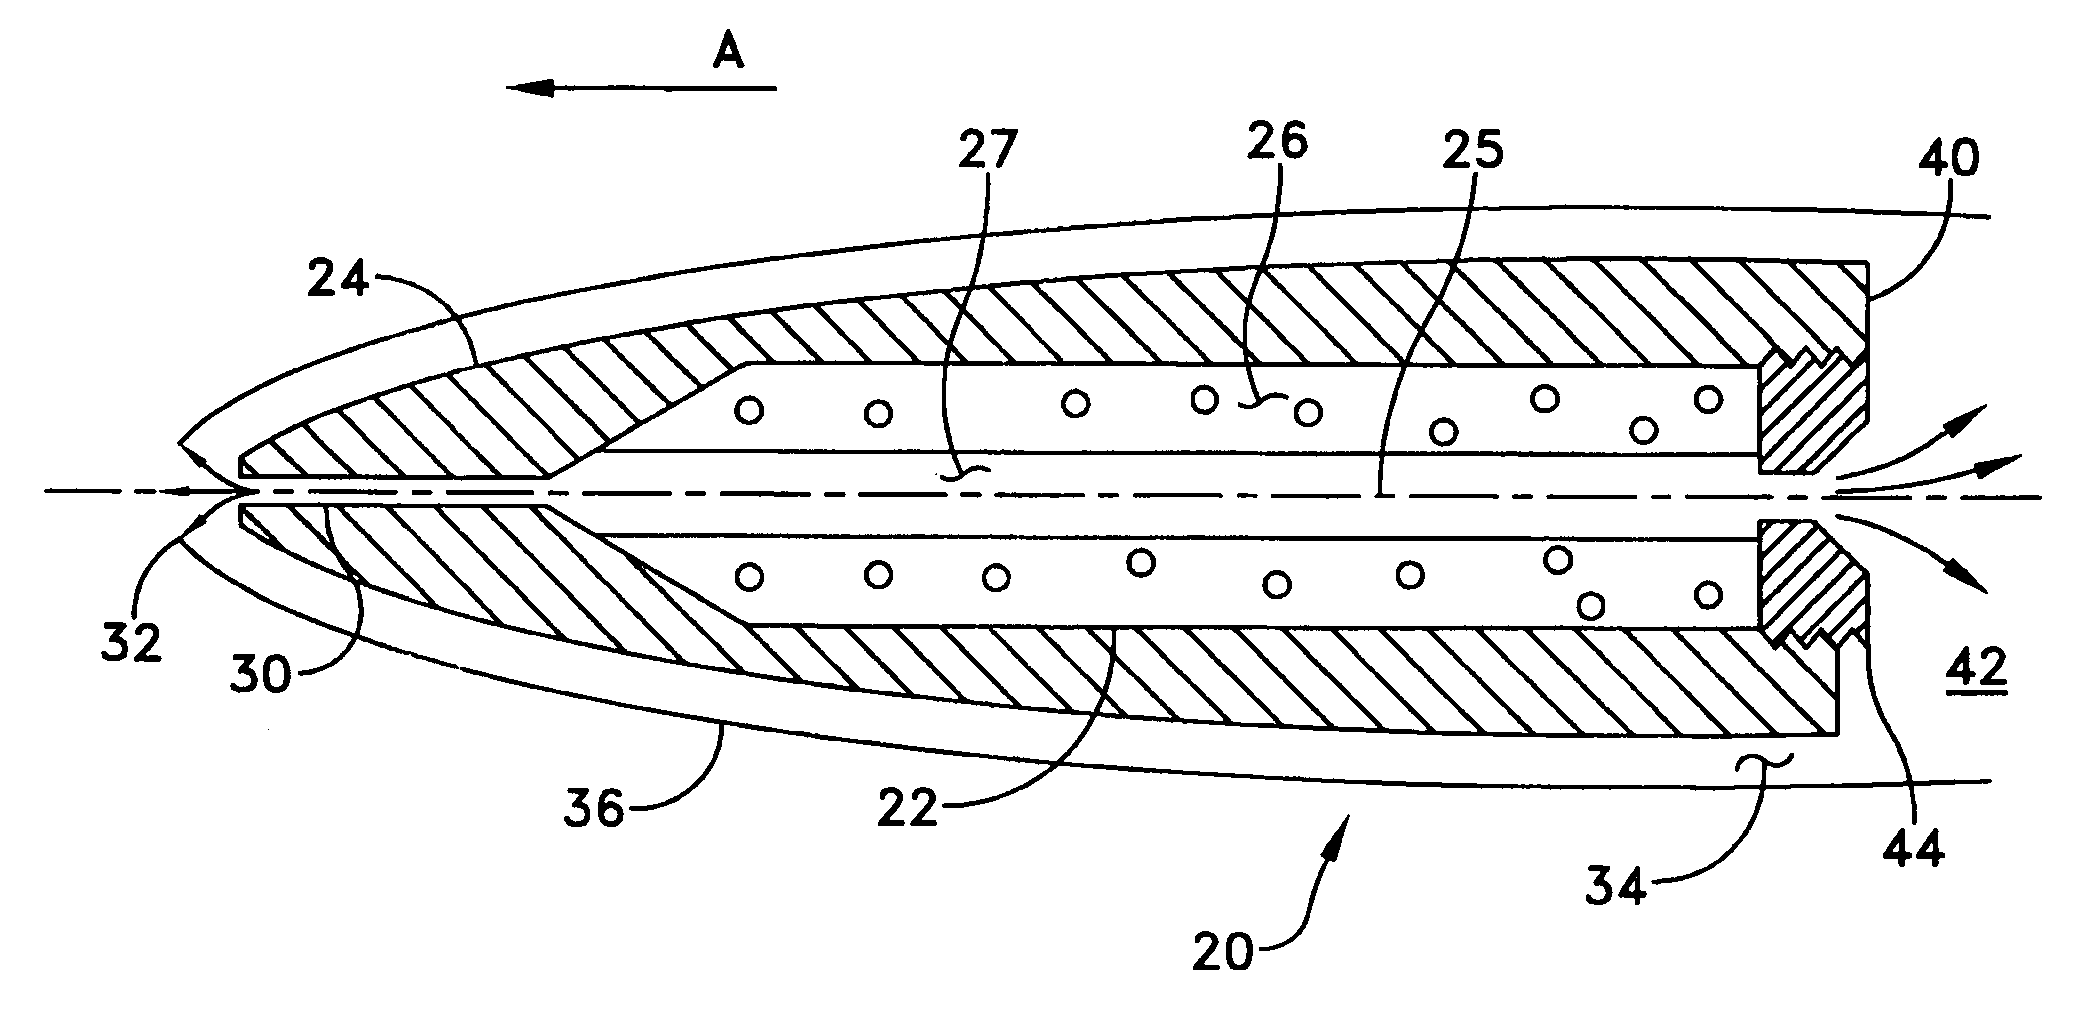 Supercavitating projectile with propulsion and ventilation jet